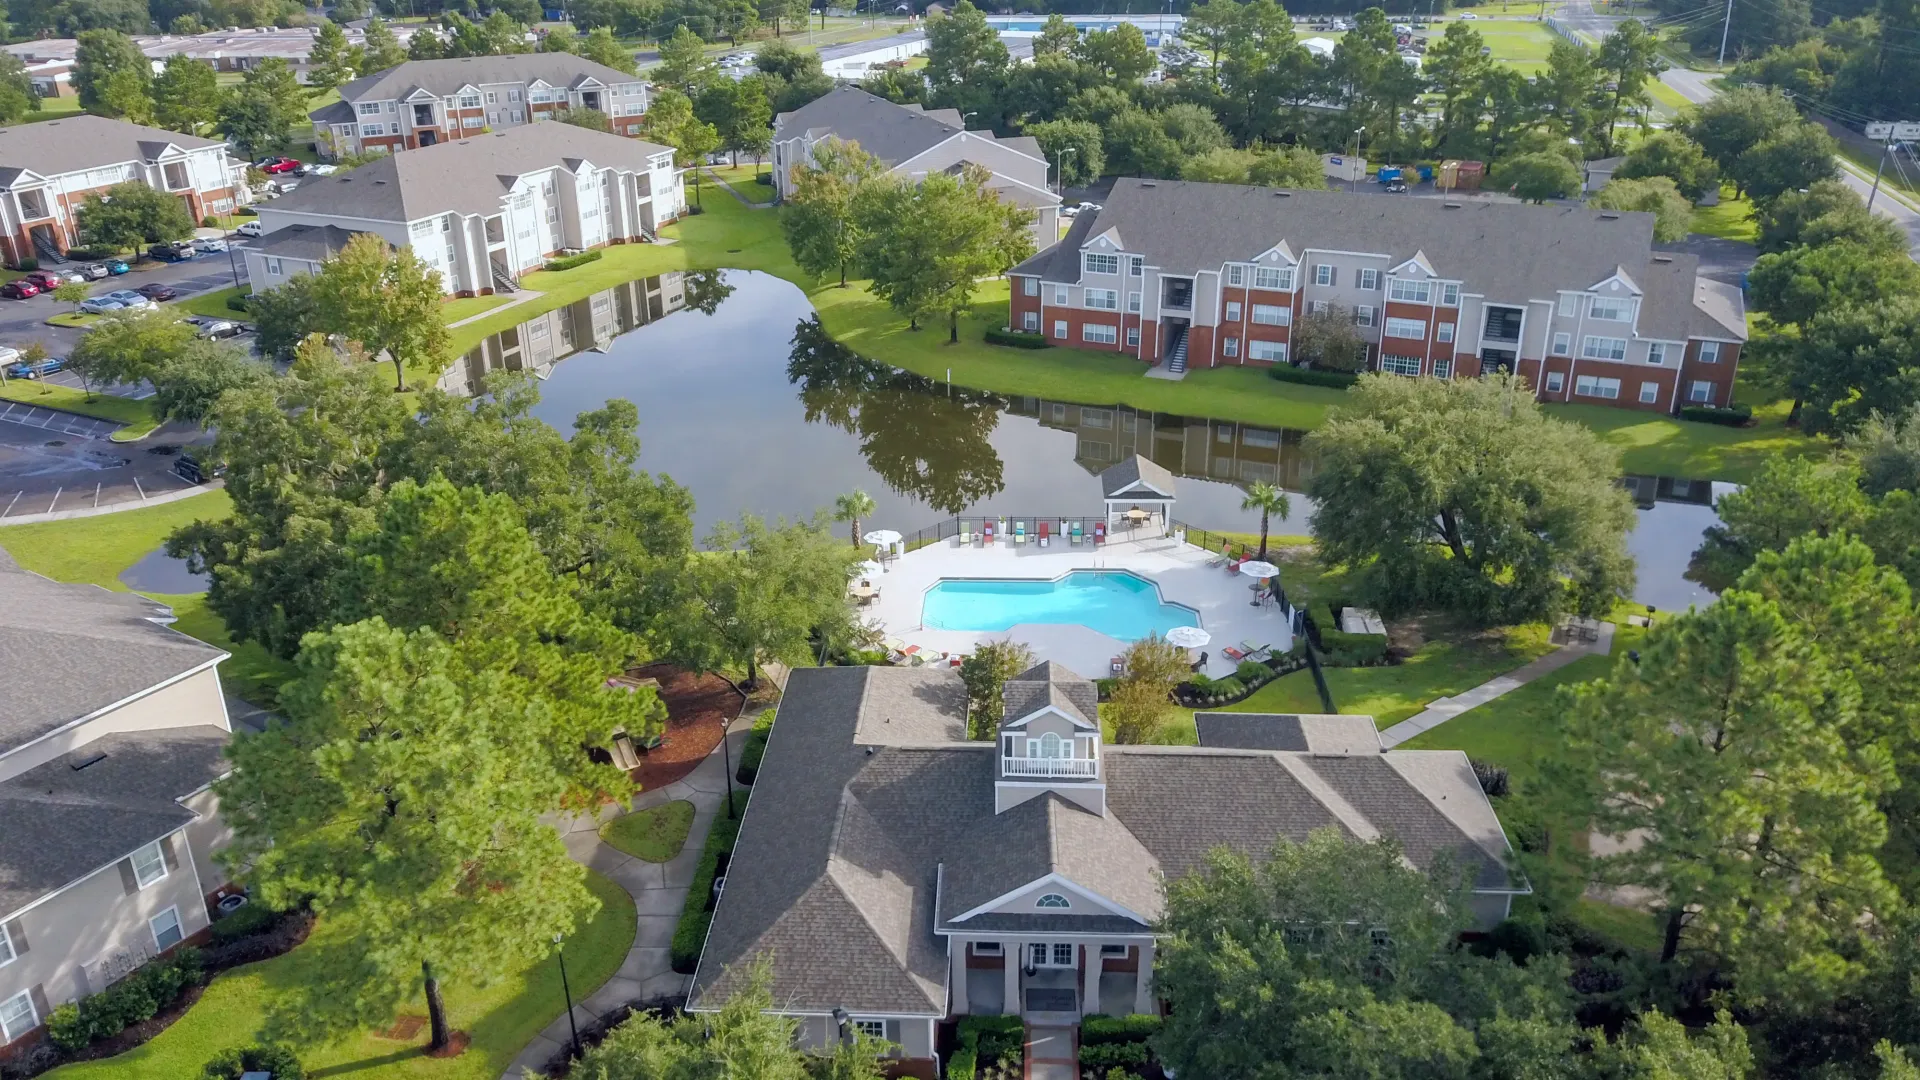 An aerial masterpiece of Eagle's Pointe's coastal bliss: lush landscapes, serene lake, playground for children, resort-style pool, and immaculate apartment buildings – amidst nature's beauty. 